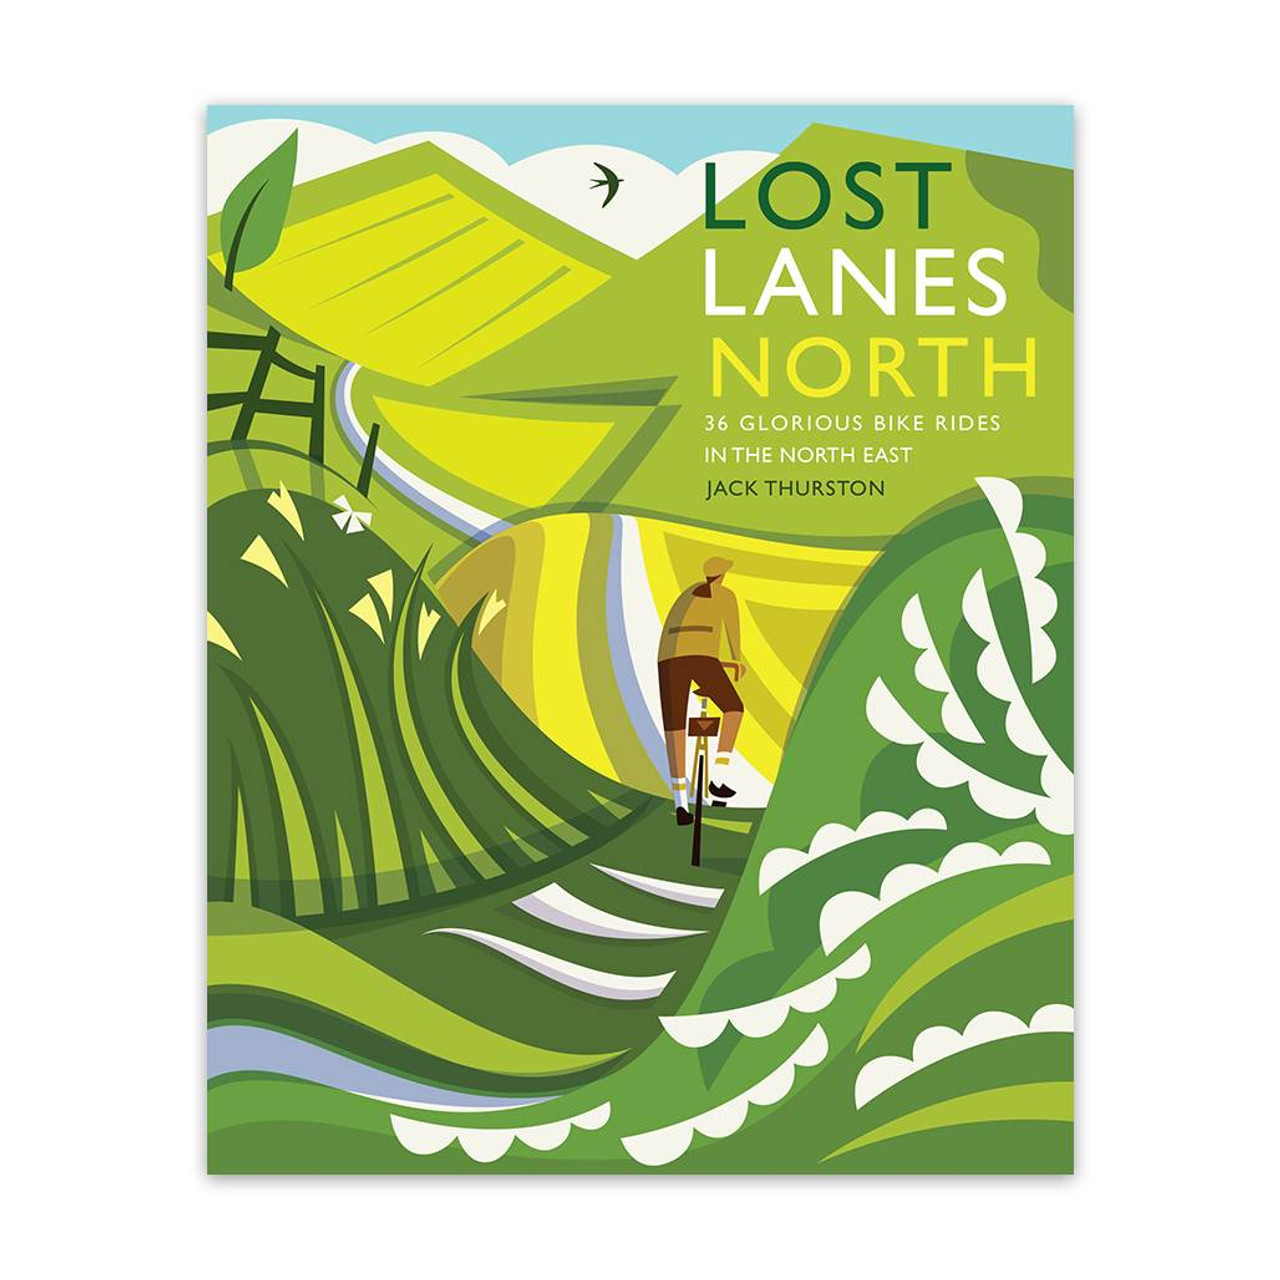 Lost Lanes North: 36 Glorious Bike Rides